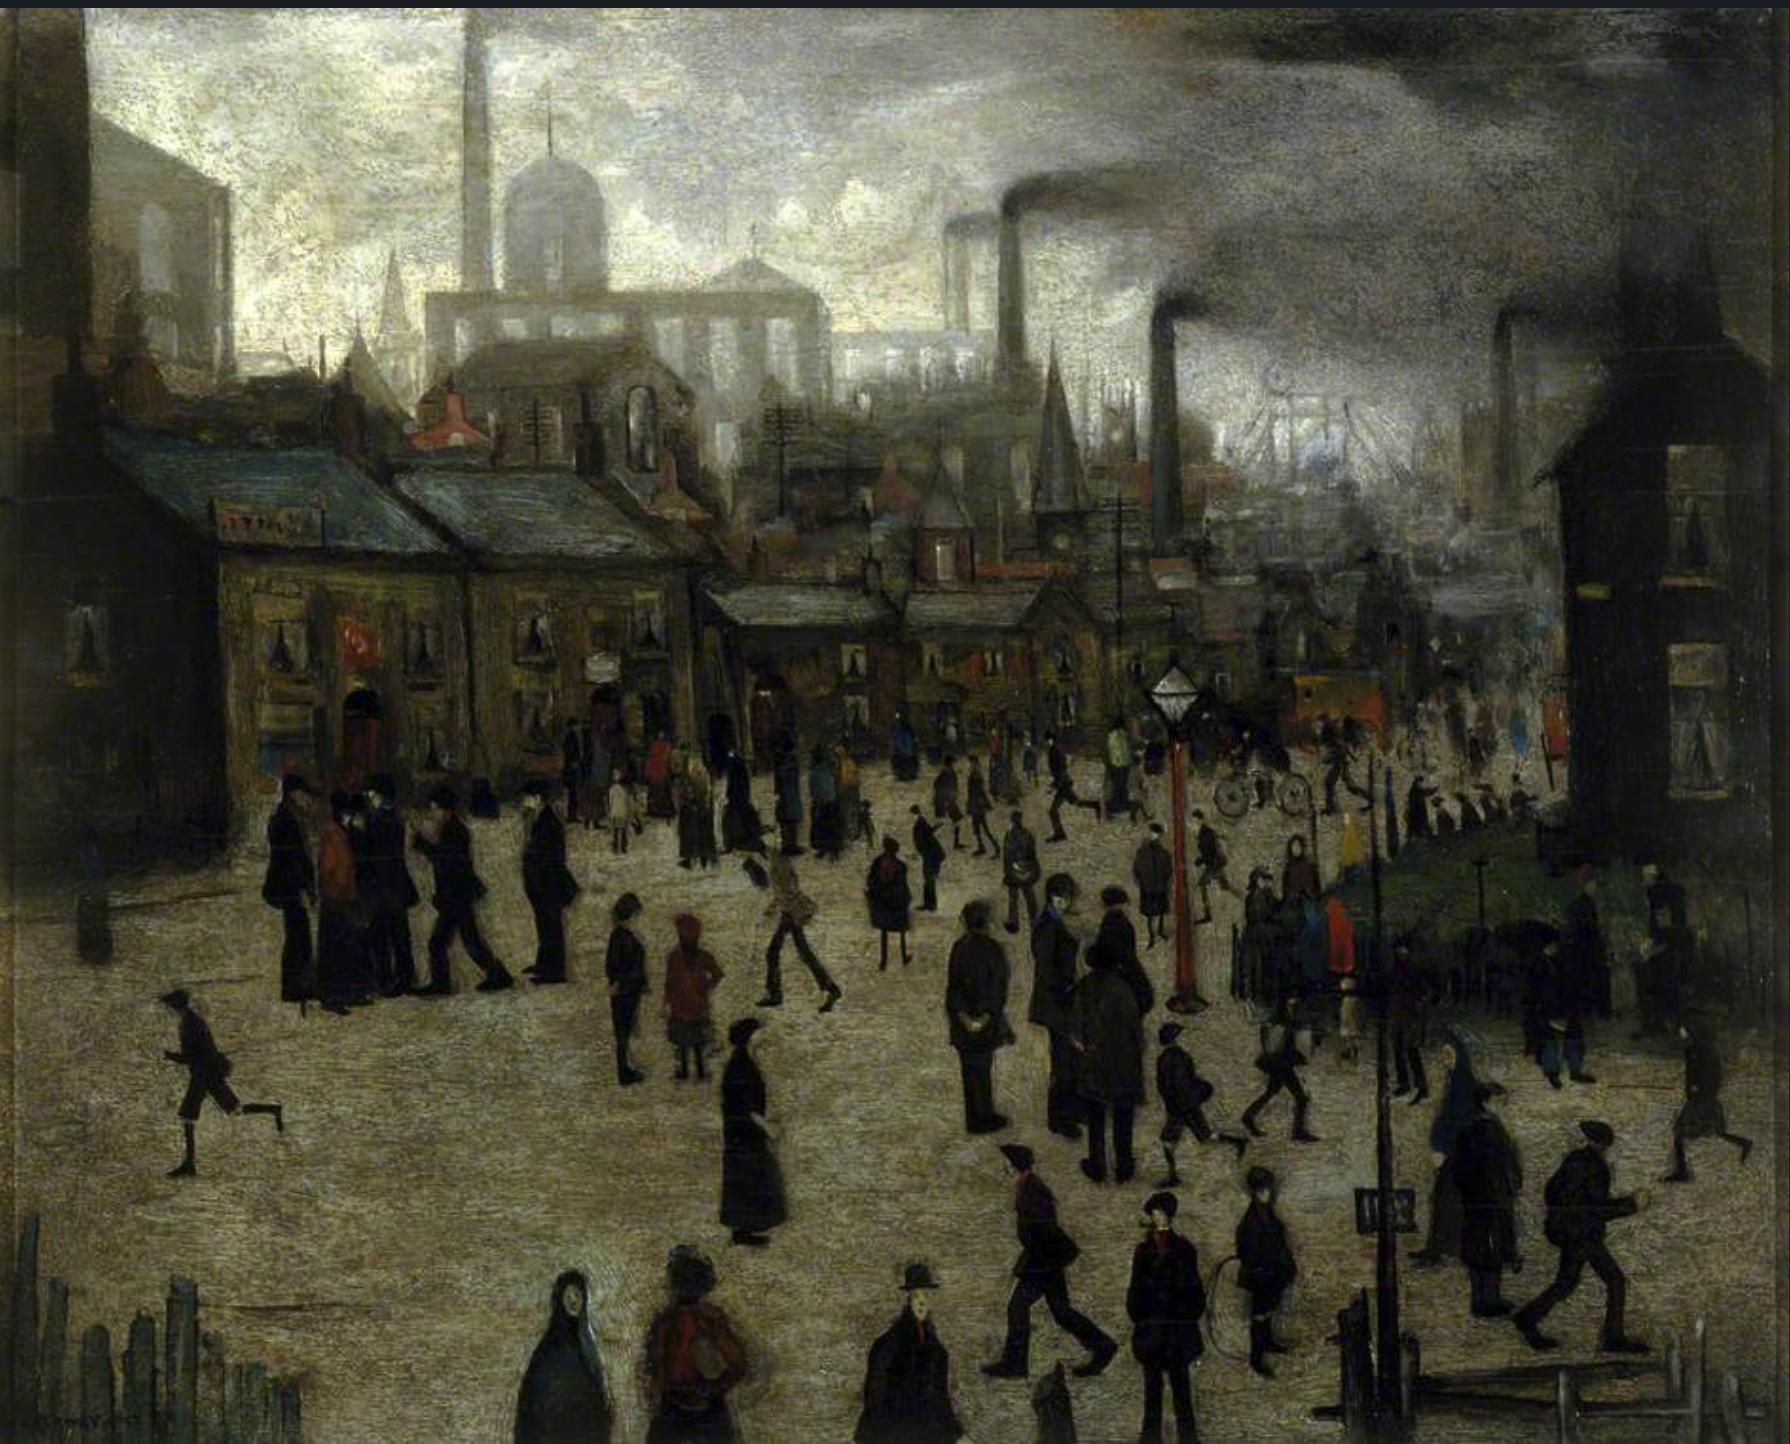 A Manufacturing Town (1922) by Laurence Stephen Lowry (1887 - 1976), English artist.